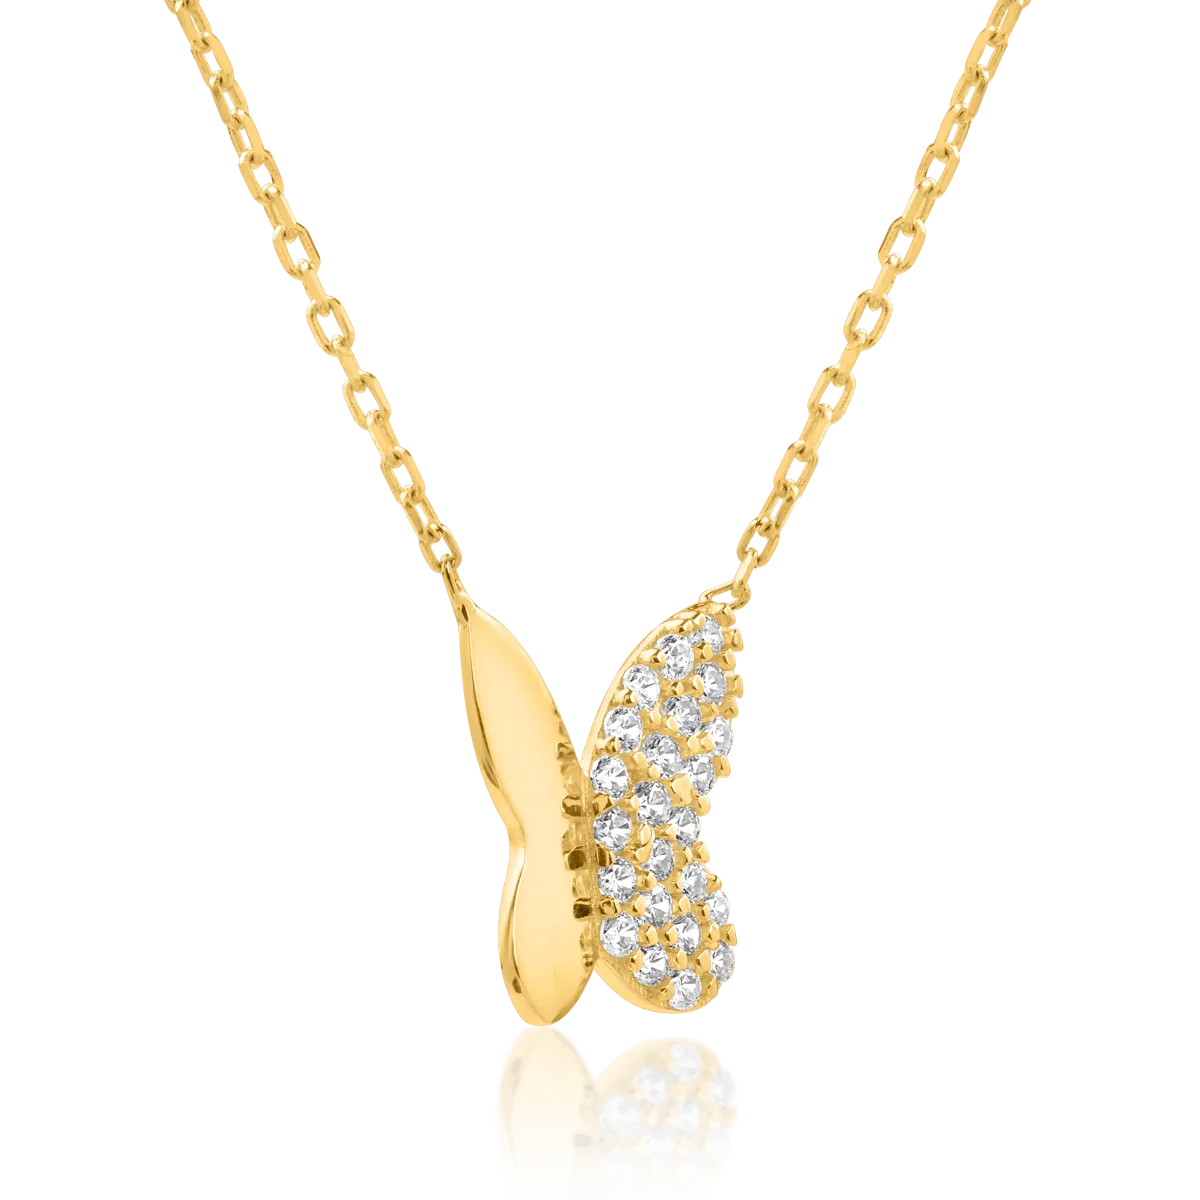 14K yellow gold pendant butterfly necklace